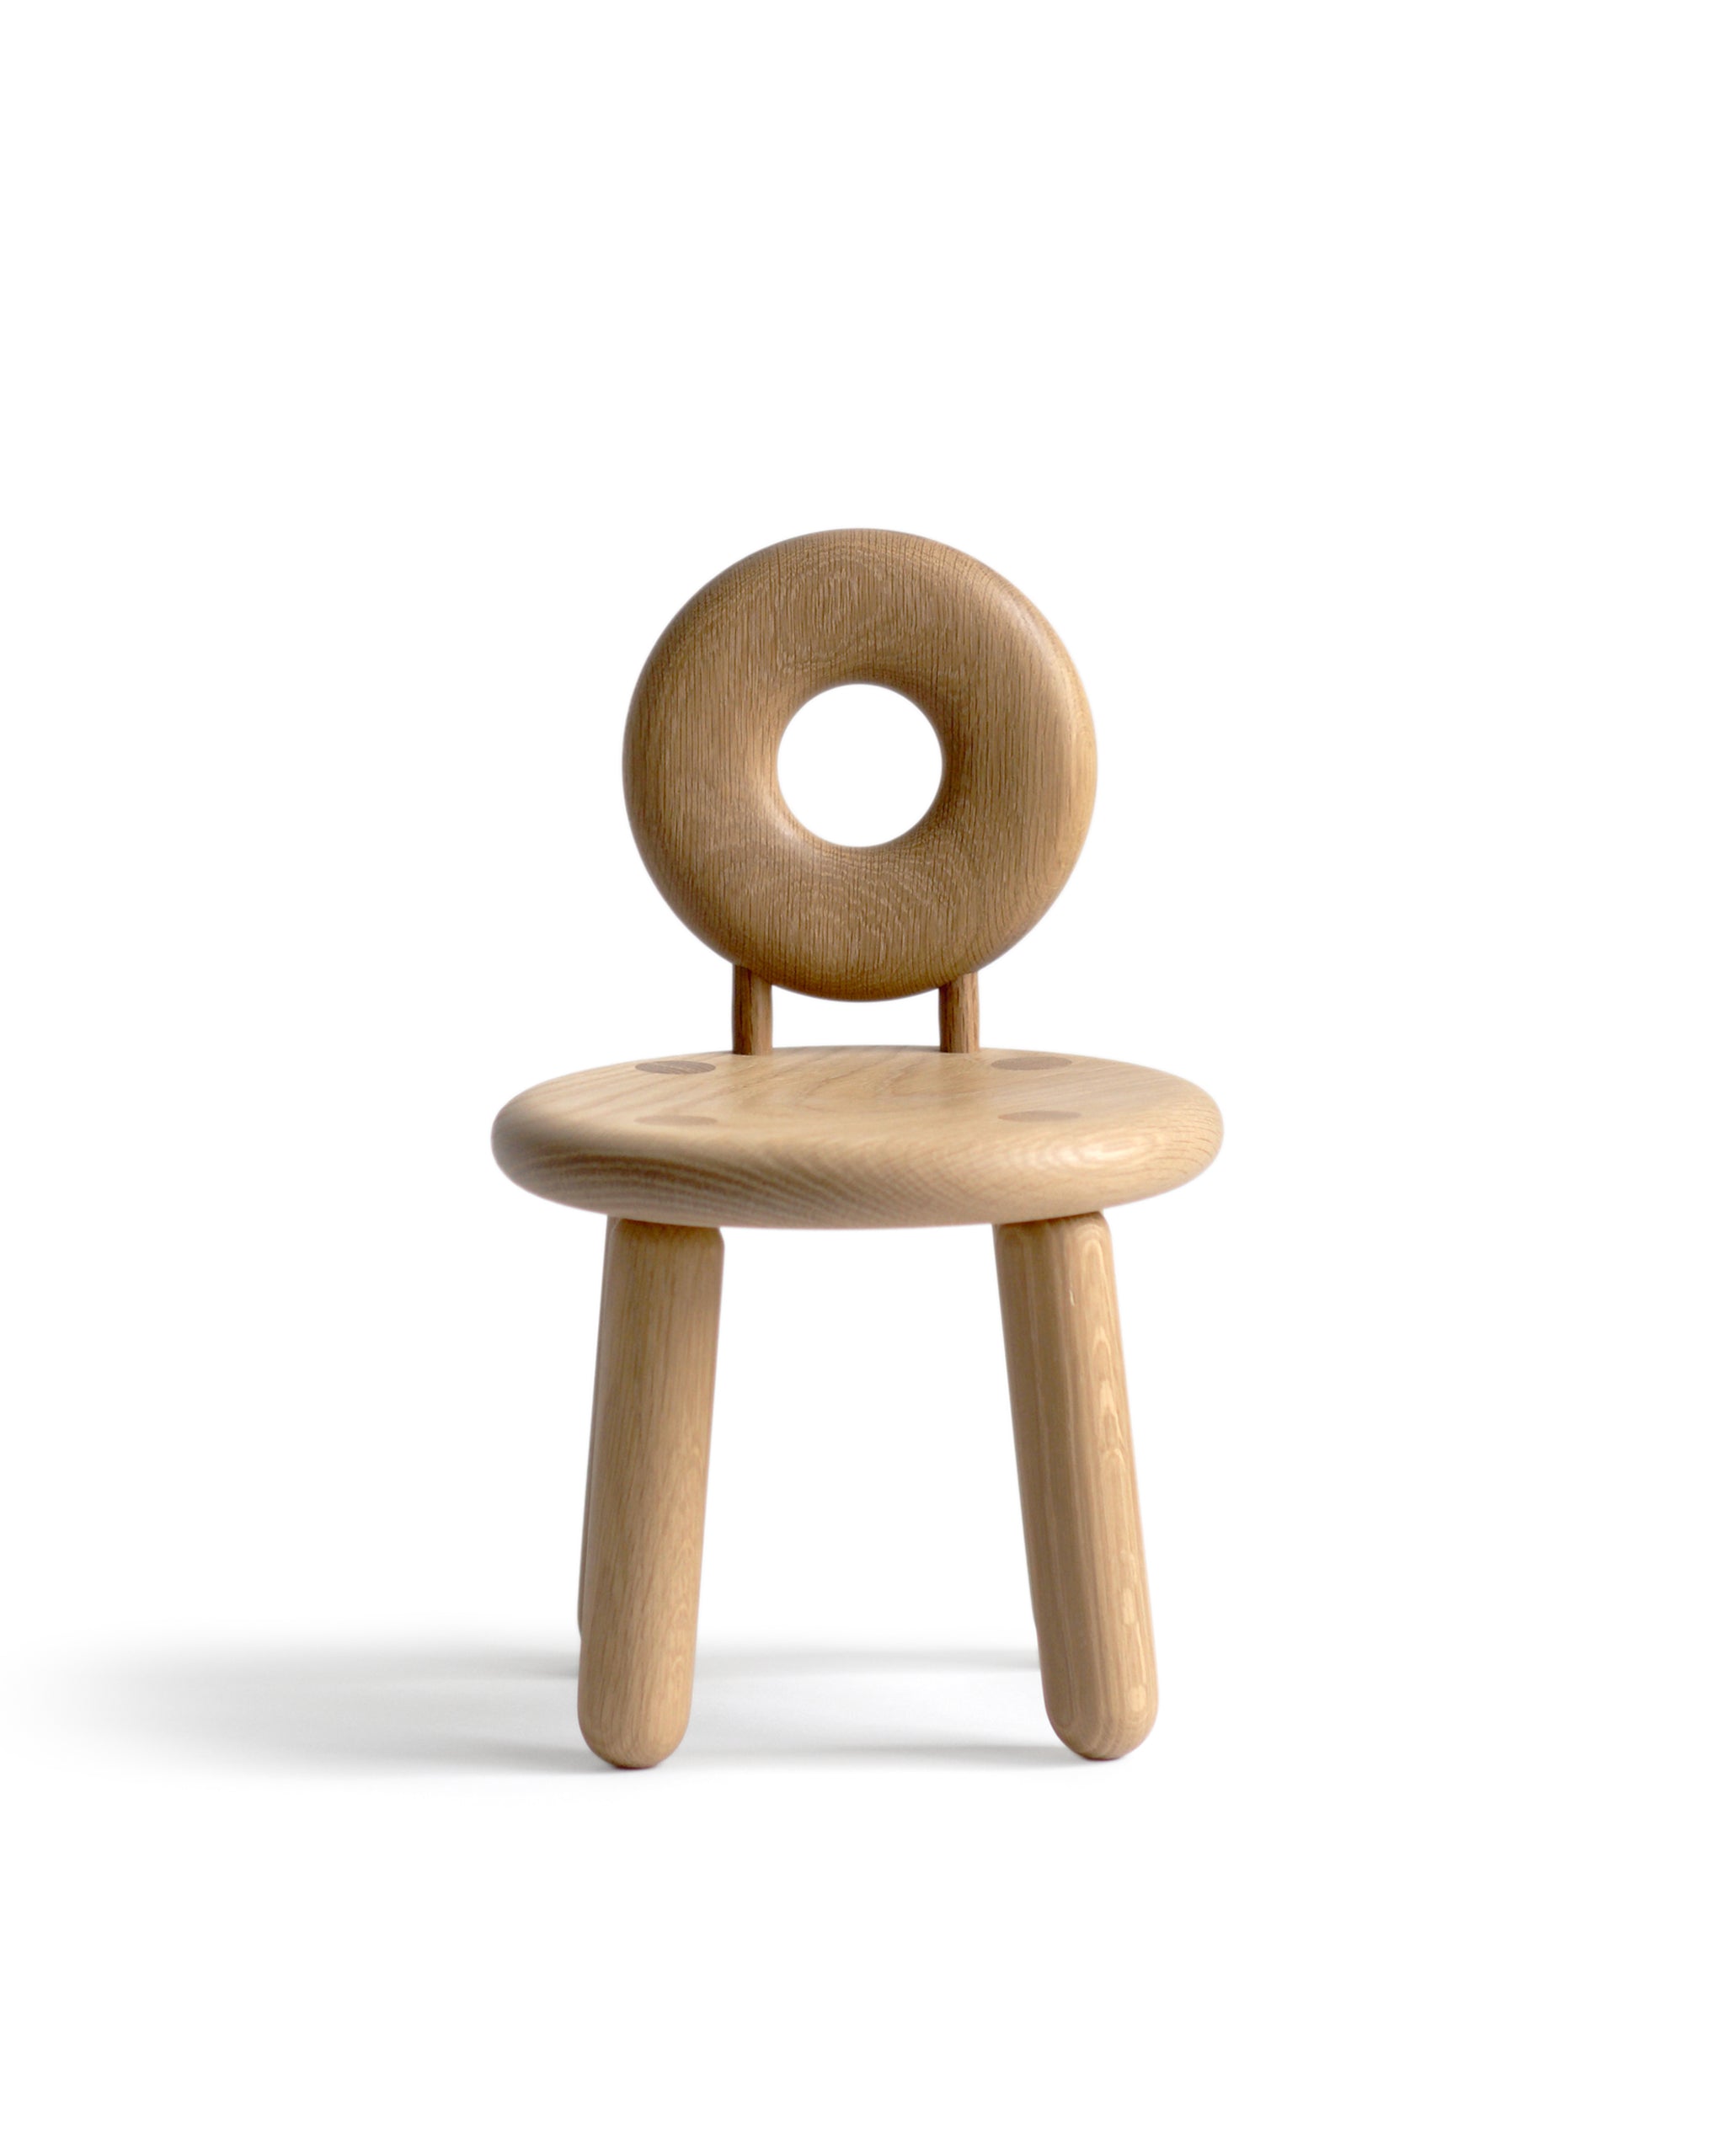 Bialy wood children's chair against white background. Designed by Pat Kim.